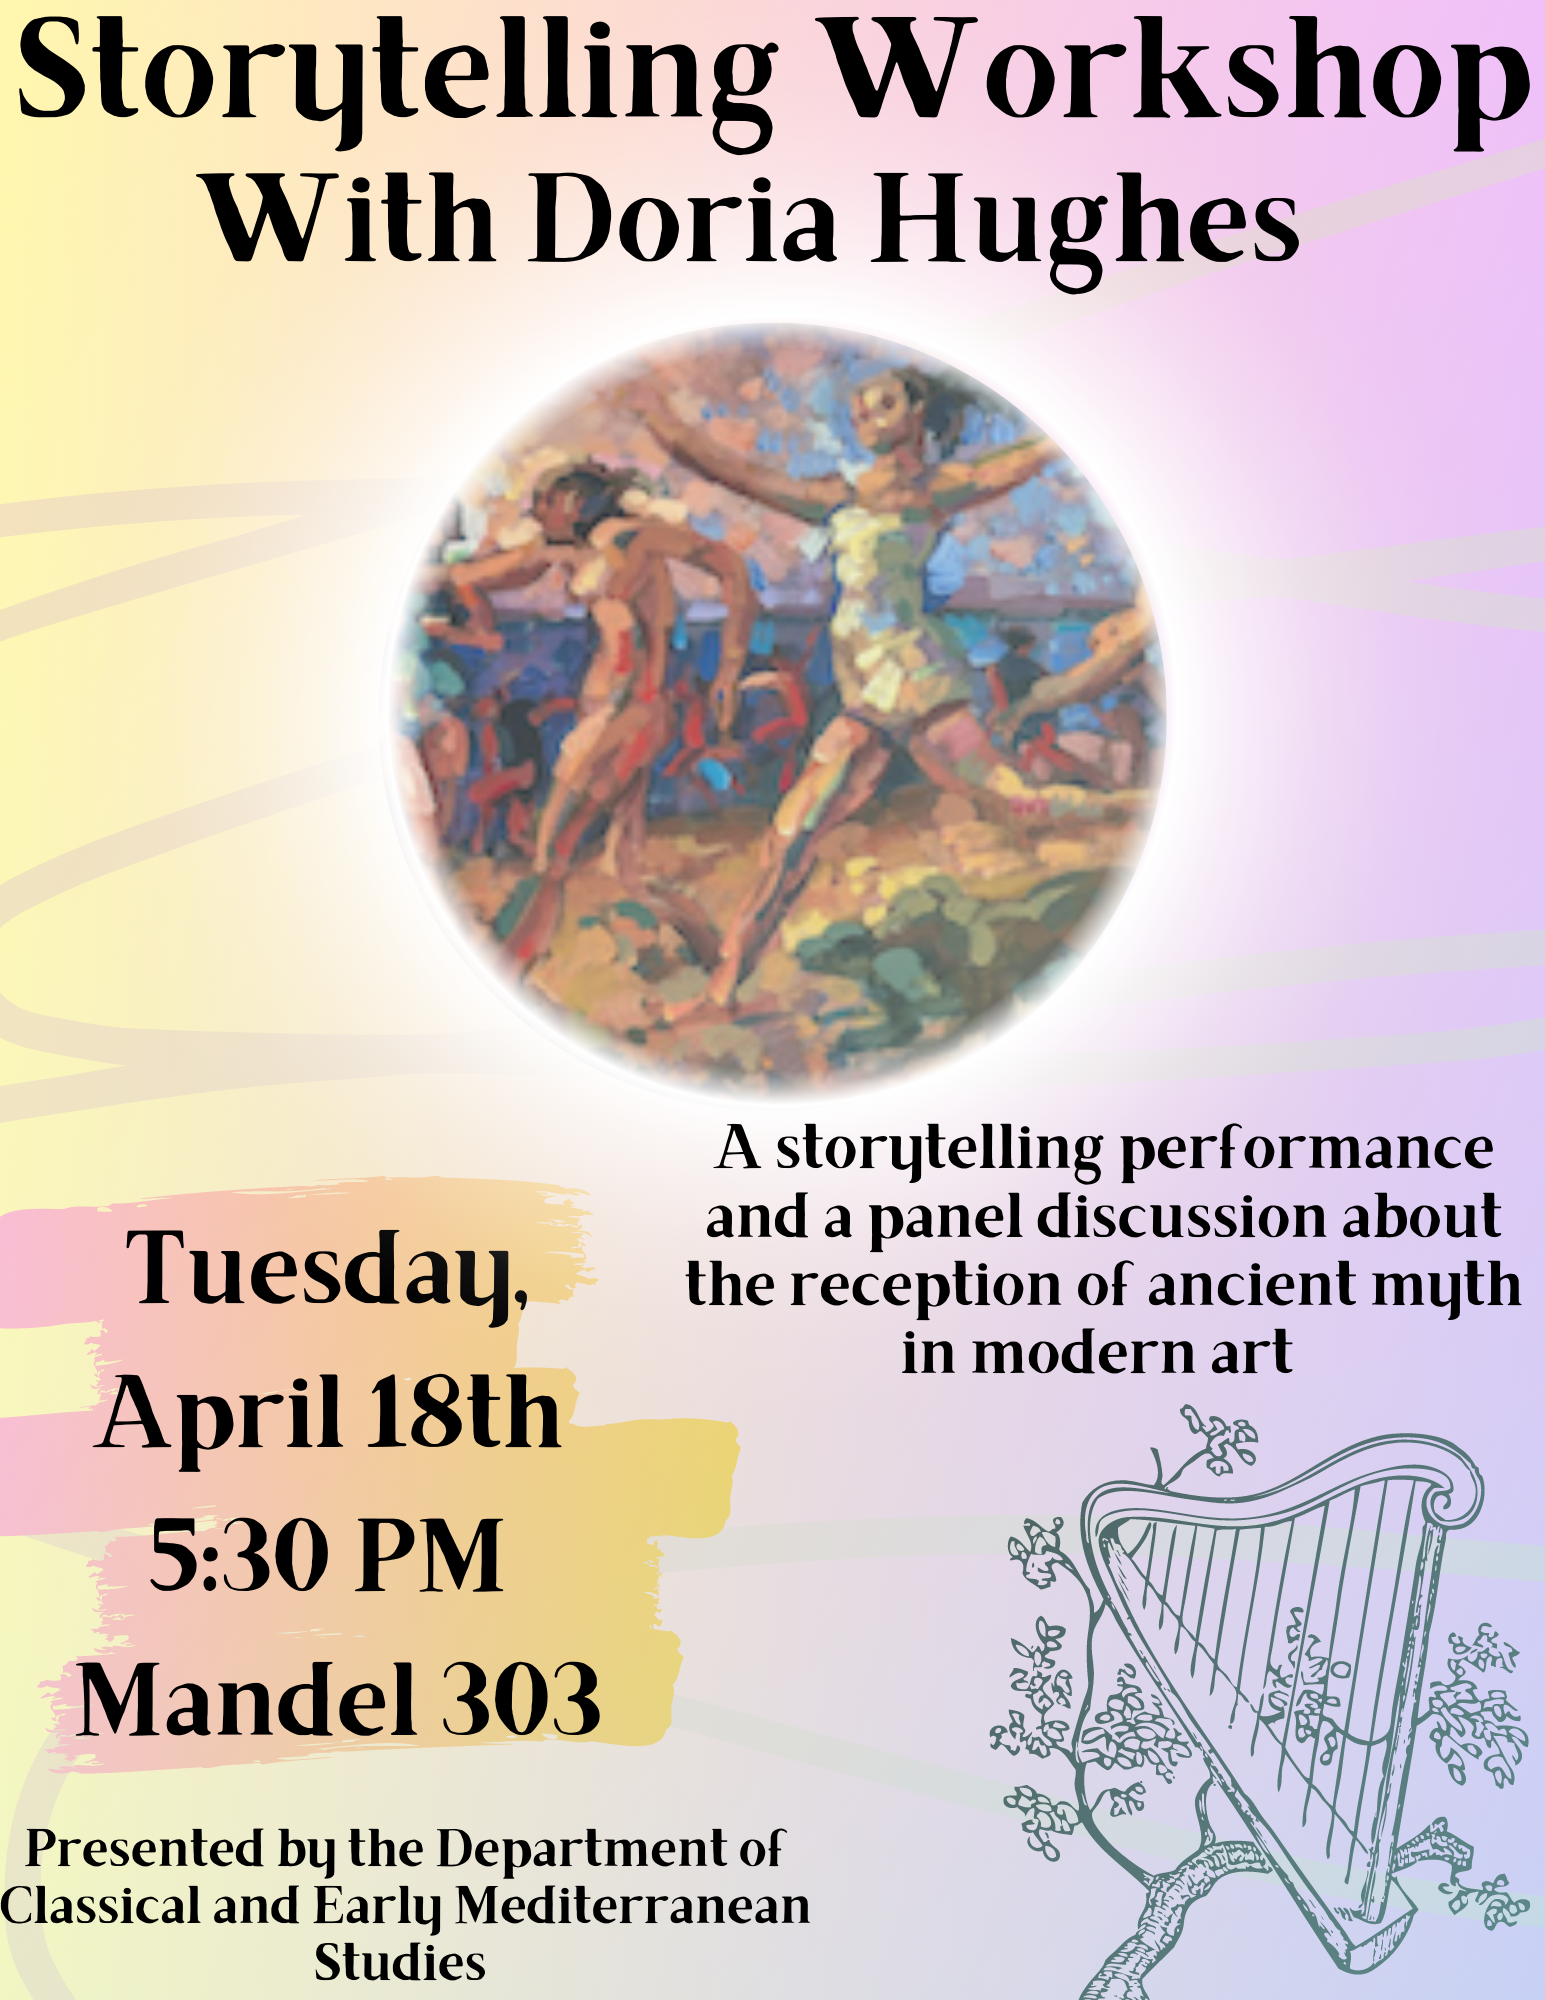 Storytelling Workshop with Doria Hughes. On Tuesday, April 18th, at 5:30 PM. A storytelling Performance and panel discussion about the reception of ancient myth in modern art.  